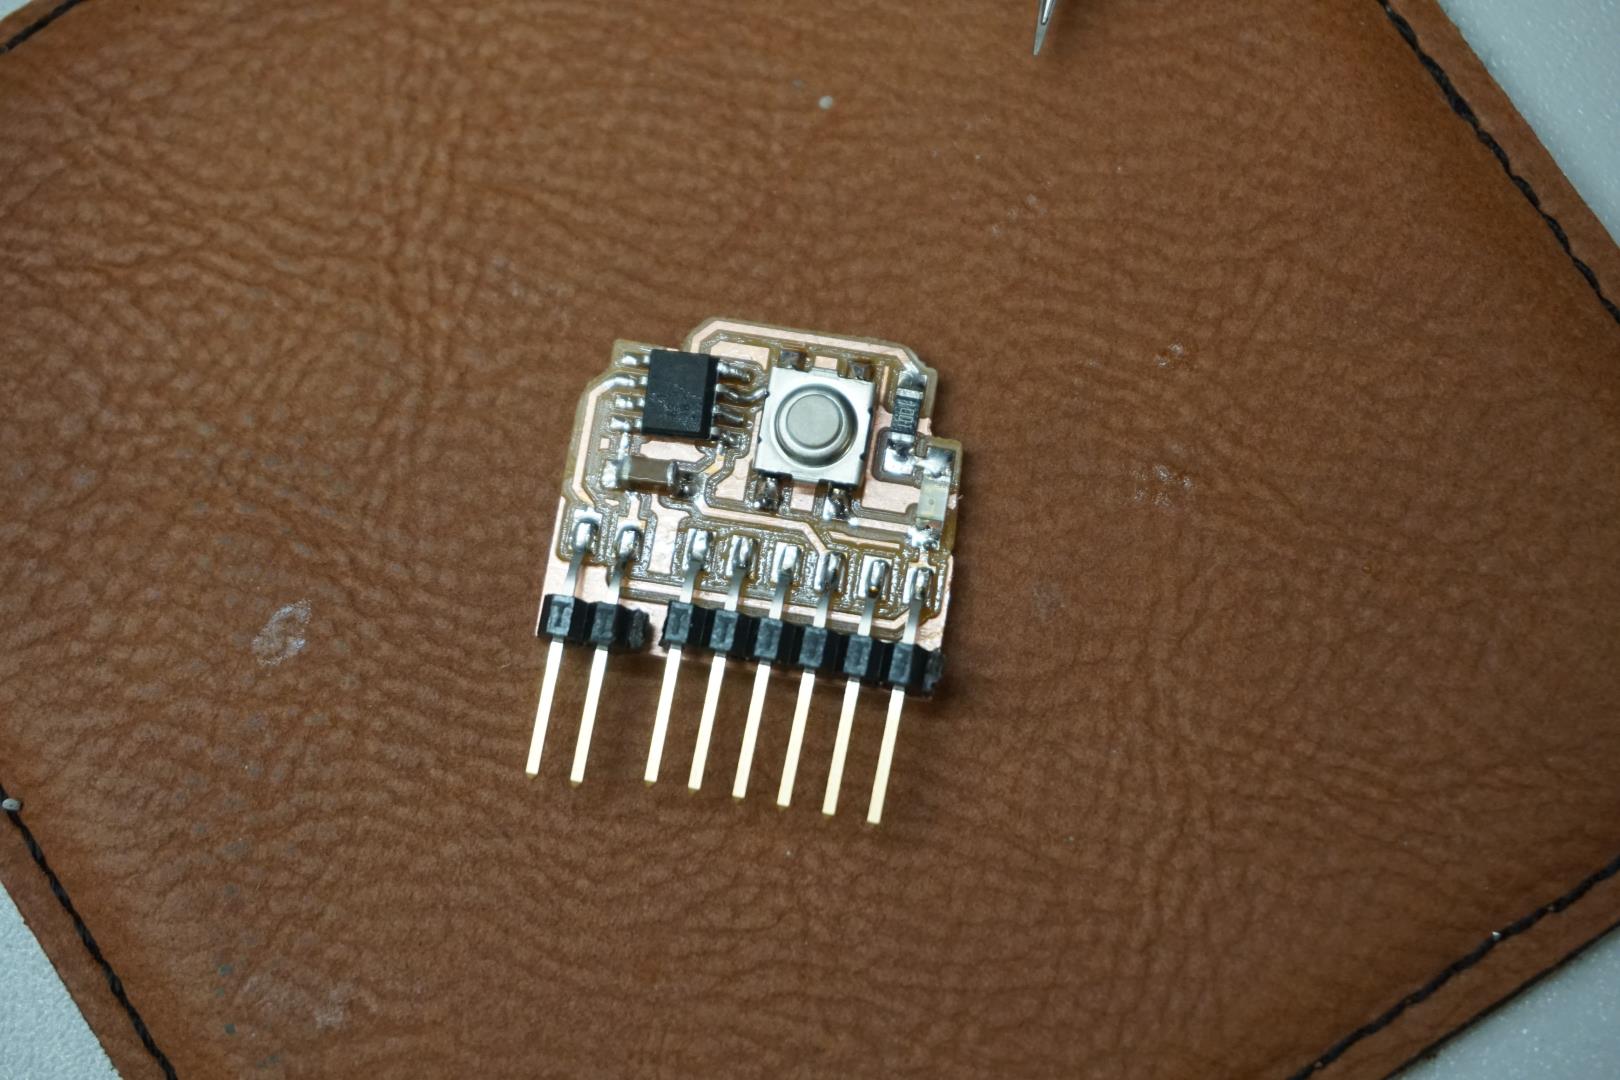 Soldered, compact and nice